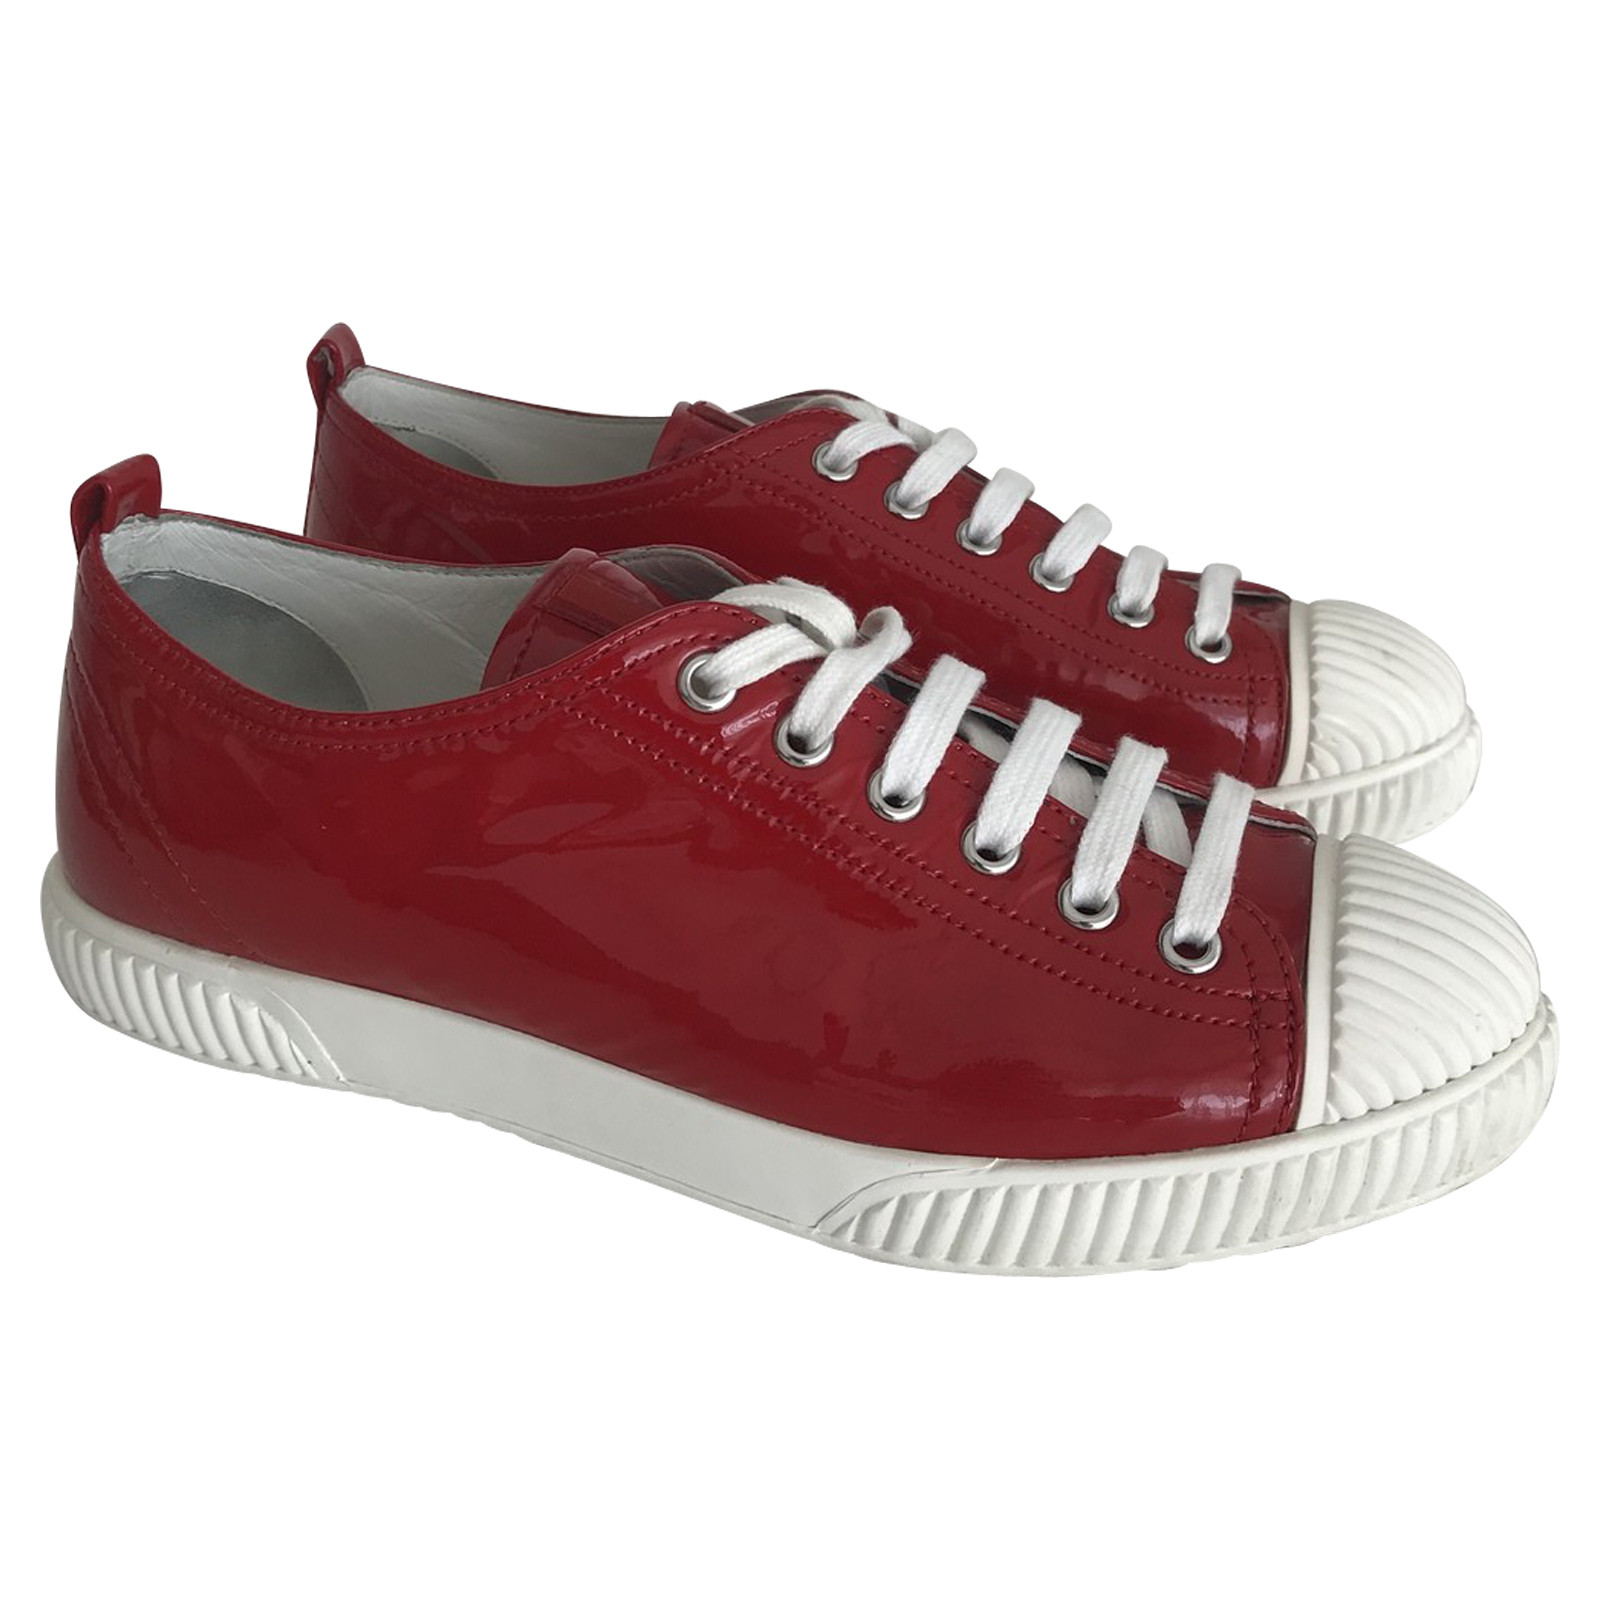 Prada Trainers Patent leather in Red - Second Hand Prada Trainers Patent  leather in Red buy used for 200€ (4043455)